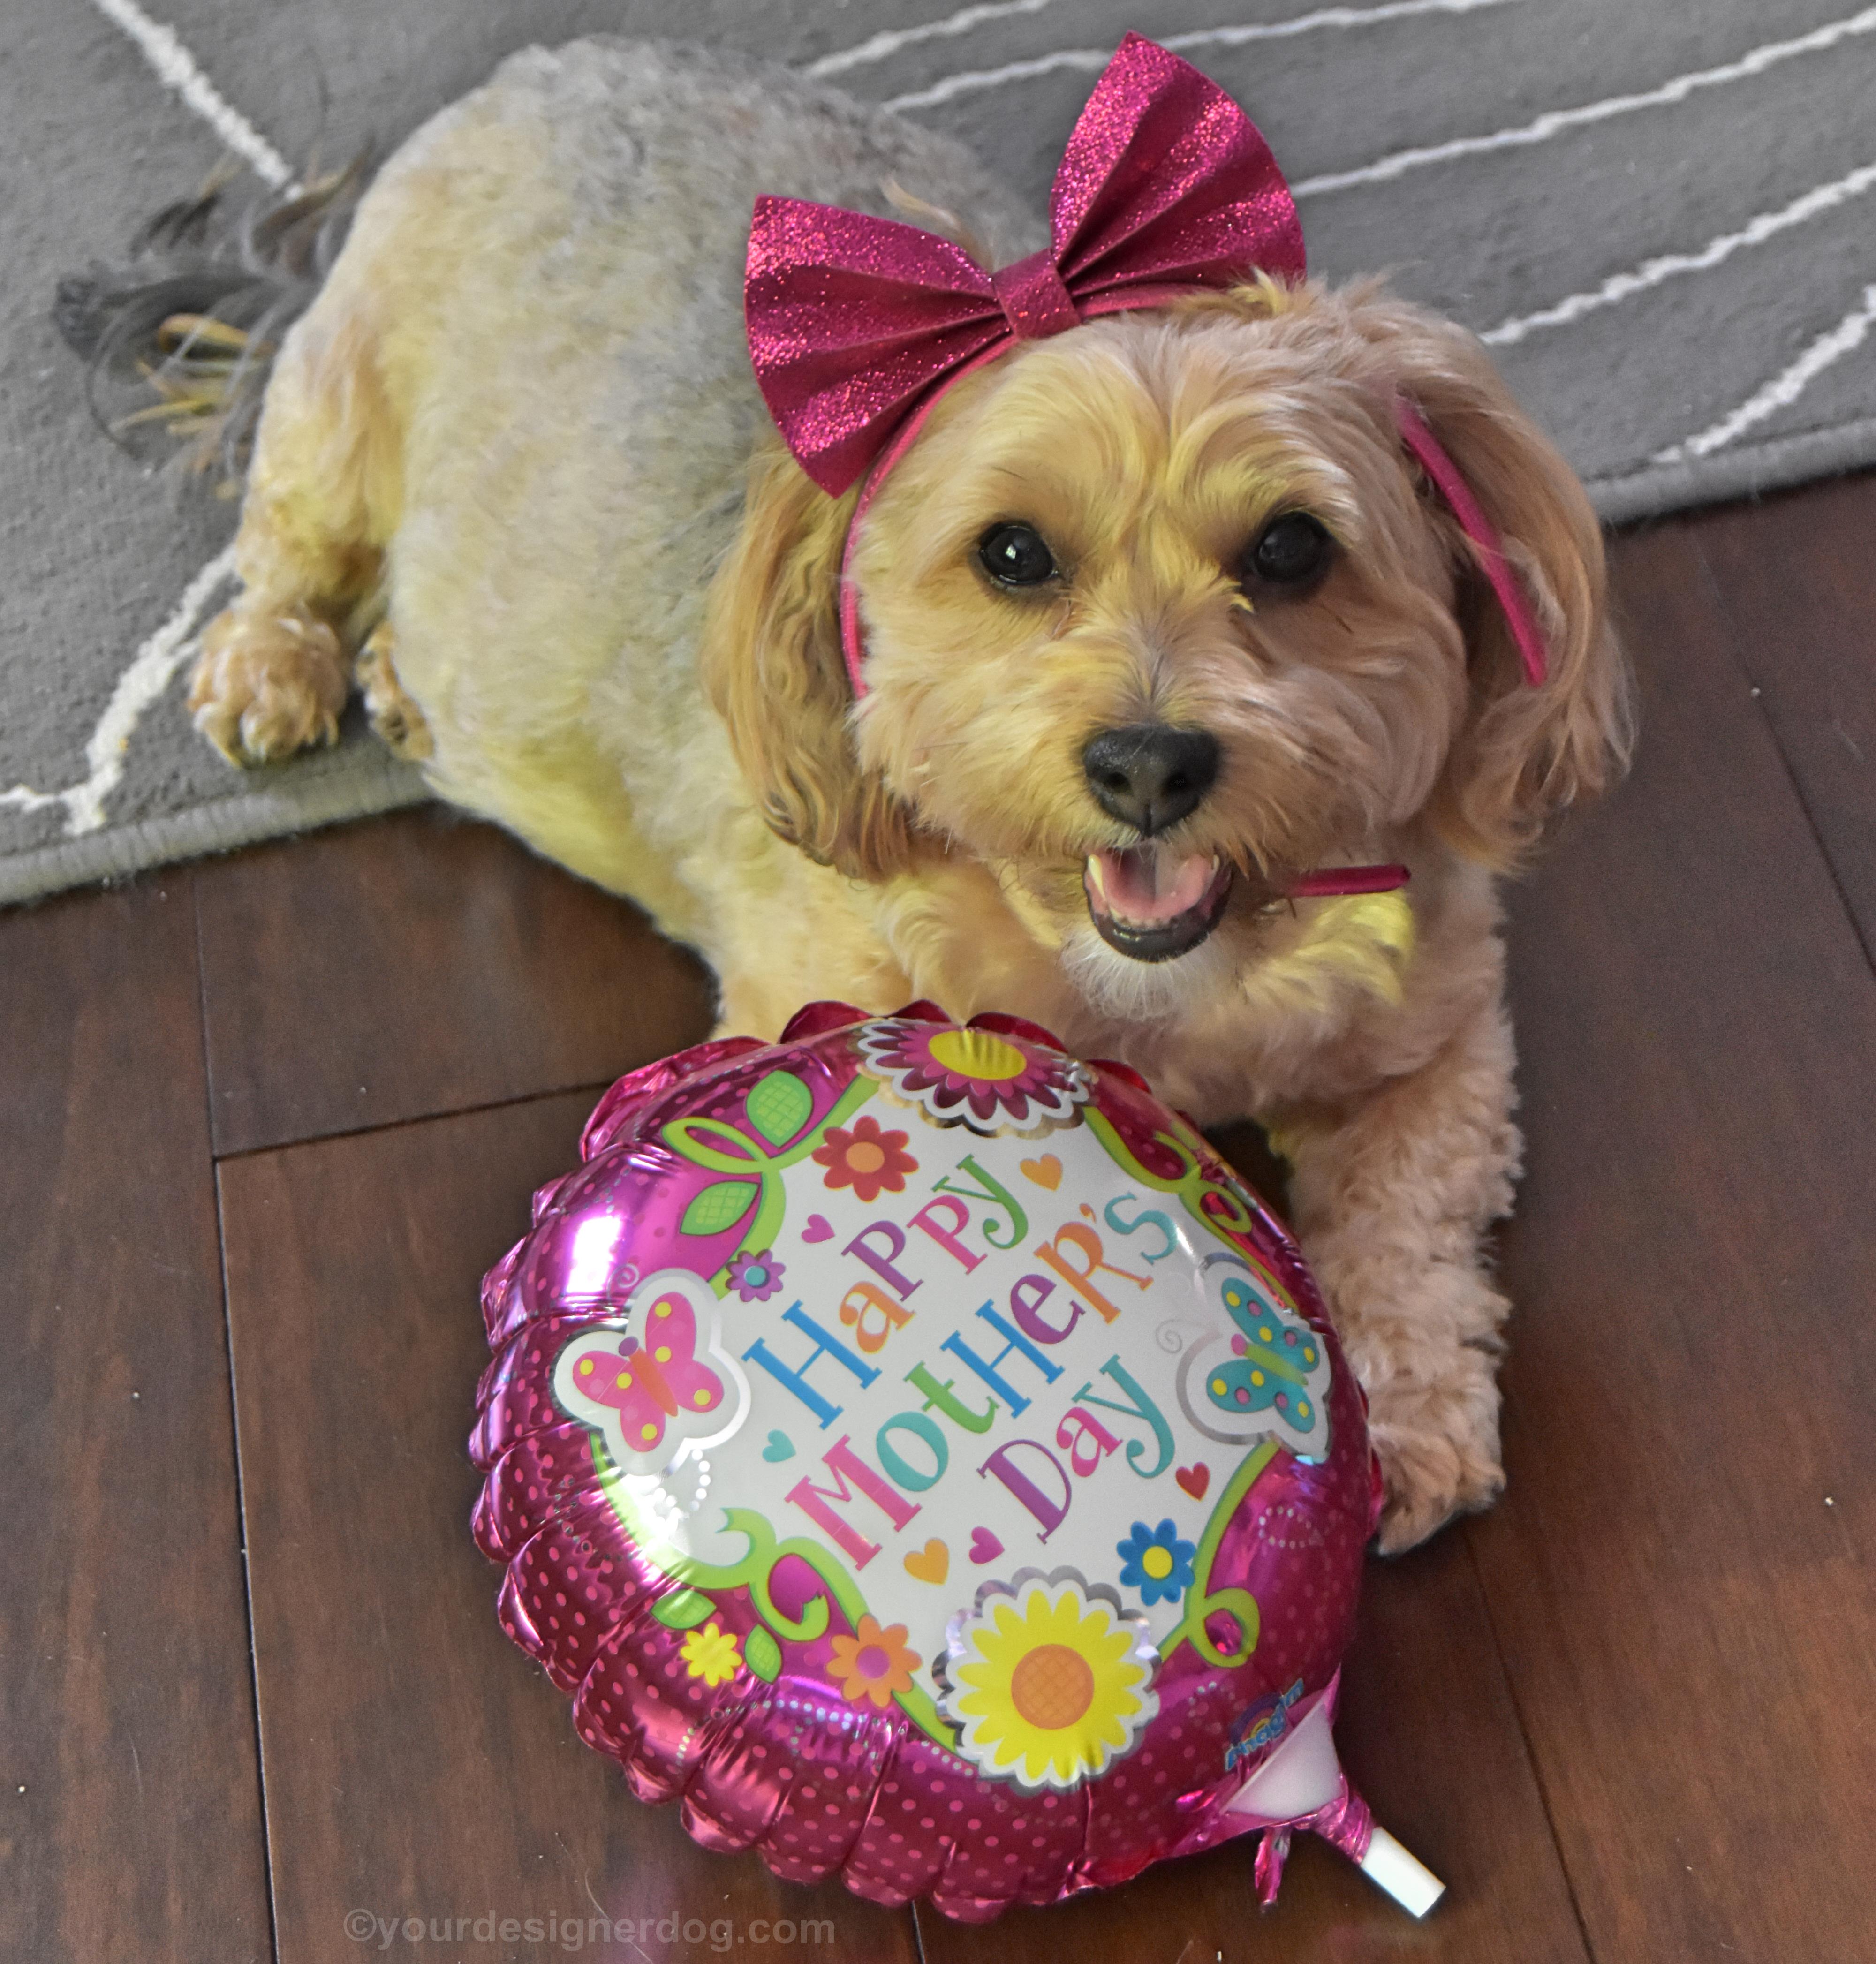 dogs, designer dogs, yorkipoo, yorkie poo, mother's day, balloon